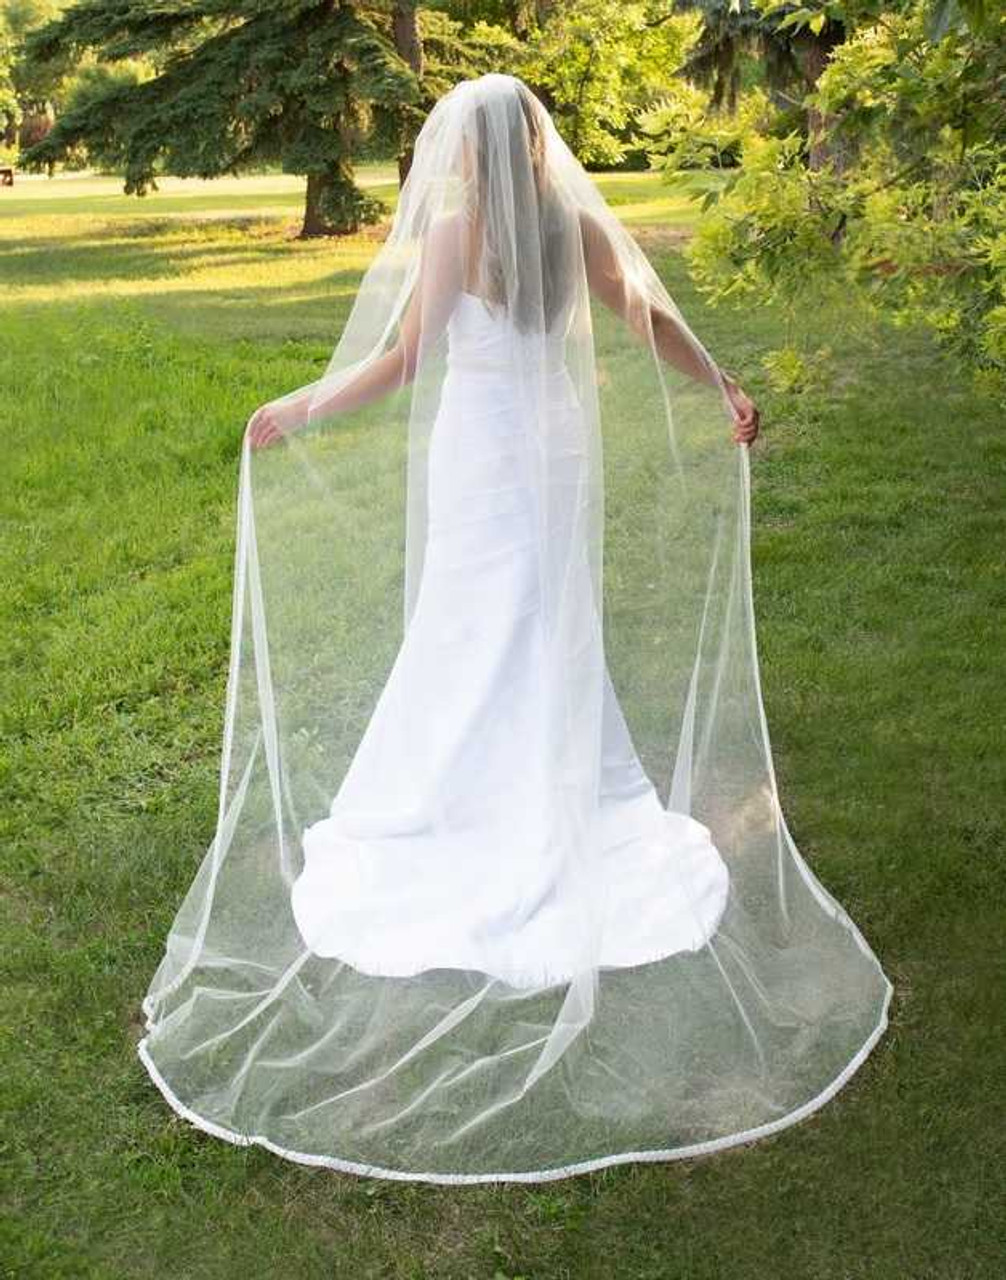 https://cdn11.bigcommerce.com/s-zb3qt33o/images/stencil/1280x1280/products/19922/63331/Cathedral-Wedding-Veil-with-Wide-Beaded-Pearl-Edge-CF281_62108__55690.1696201044.jpg?c=2